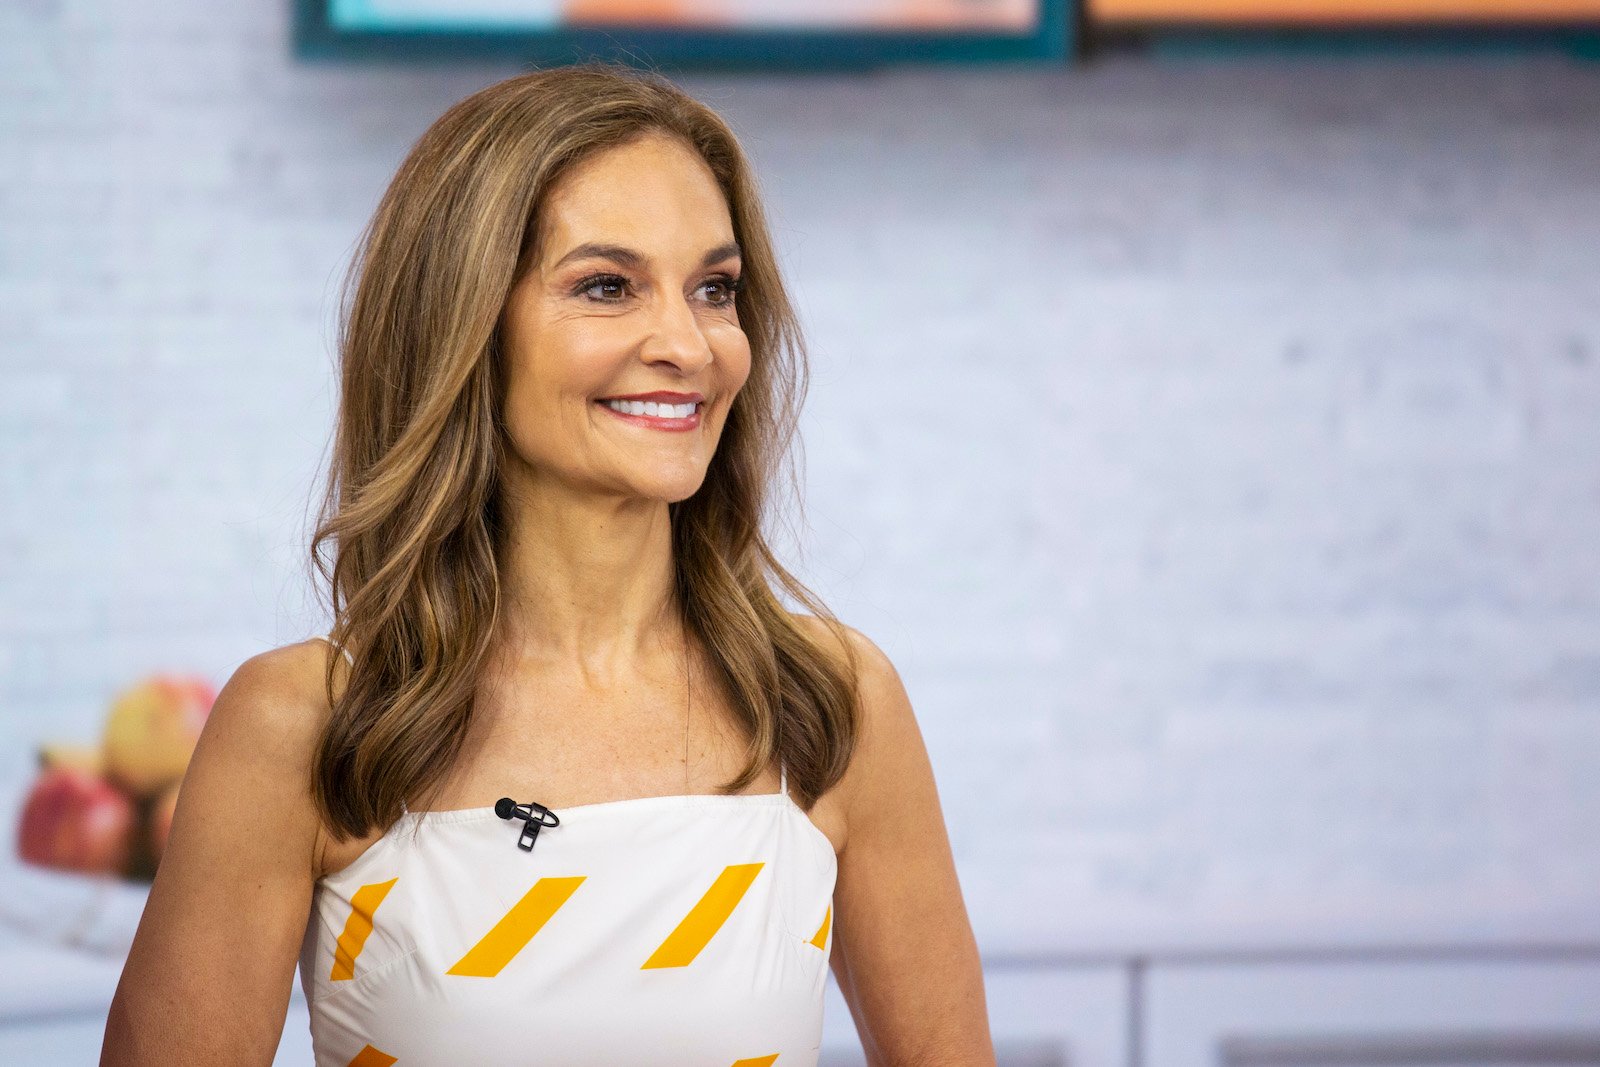 Joy Bauer appeared on The Today Show in 2019